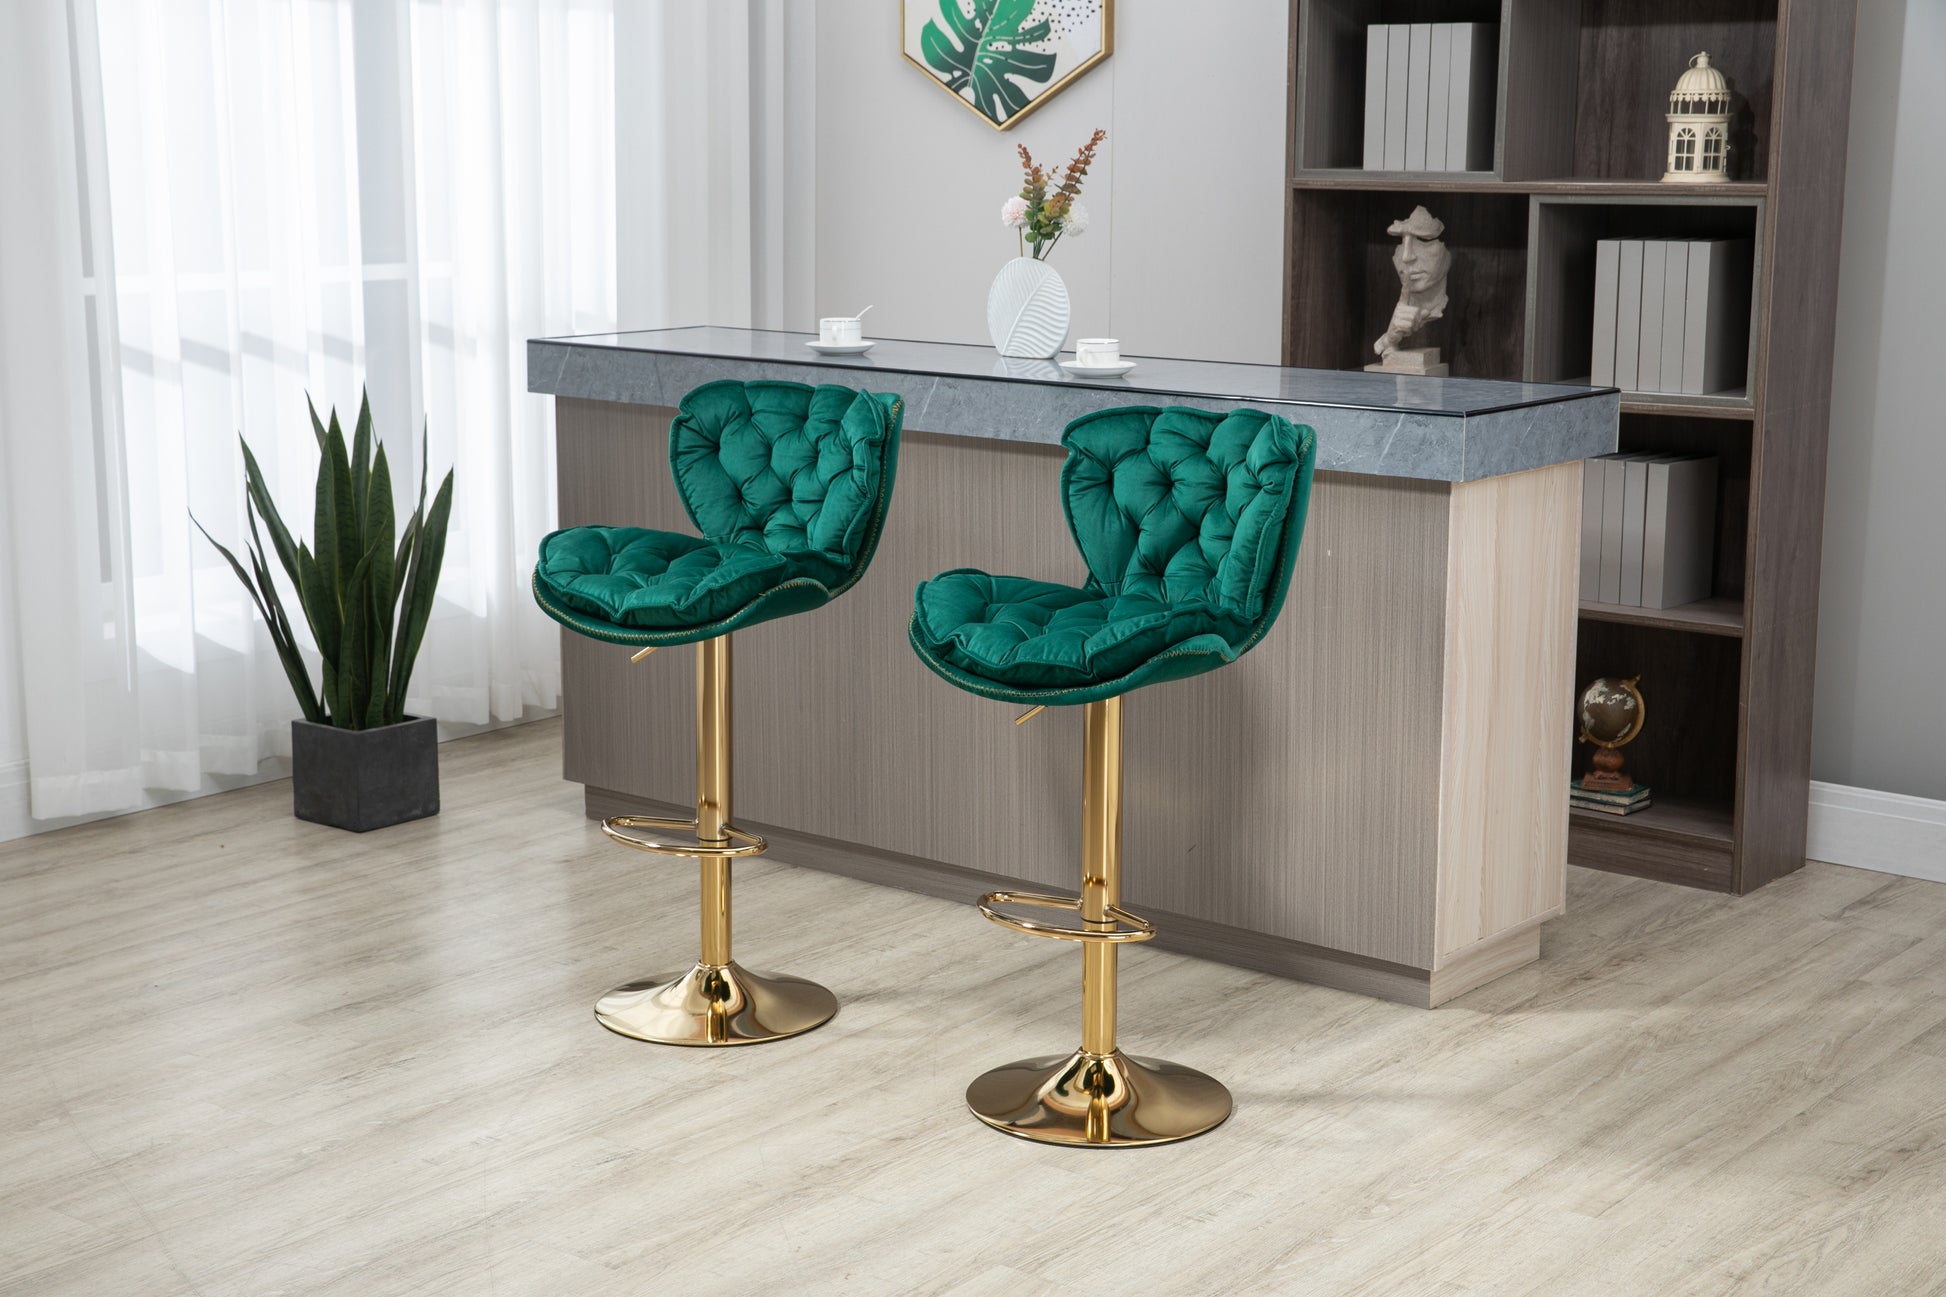 COOLMORE Bar Stools with Back and Footrest Counter Height Dining Chairs 2PC /SET